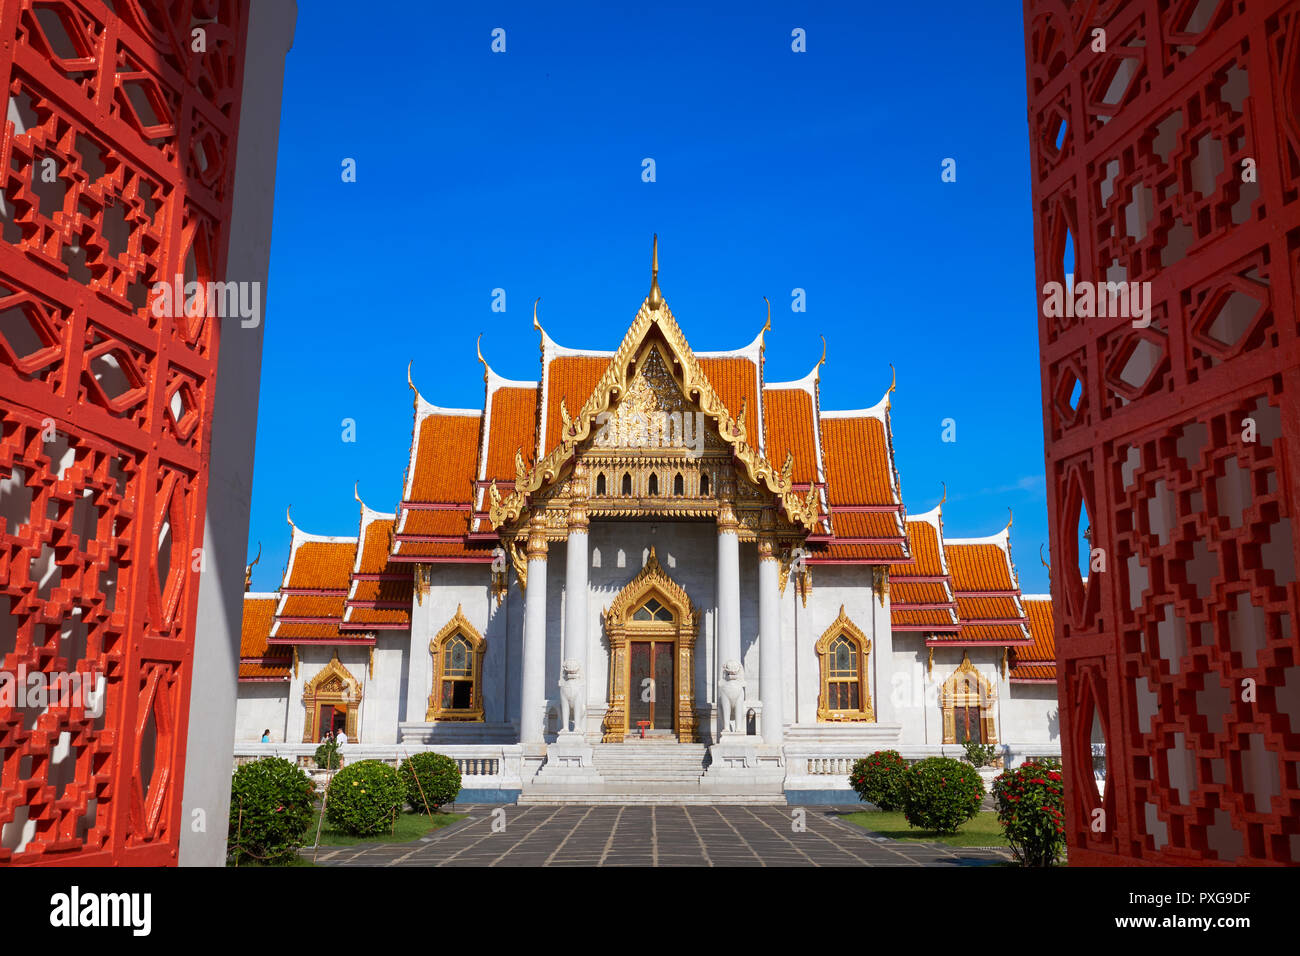 Wat Benchamabophit or Marble Temple in Bangkok, Thailand, seen early morning from its eastern gate Stock Photo